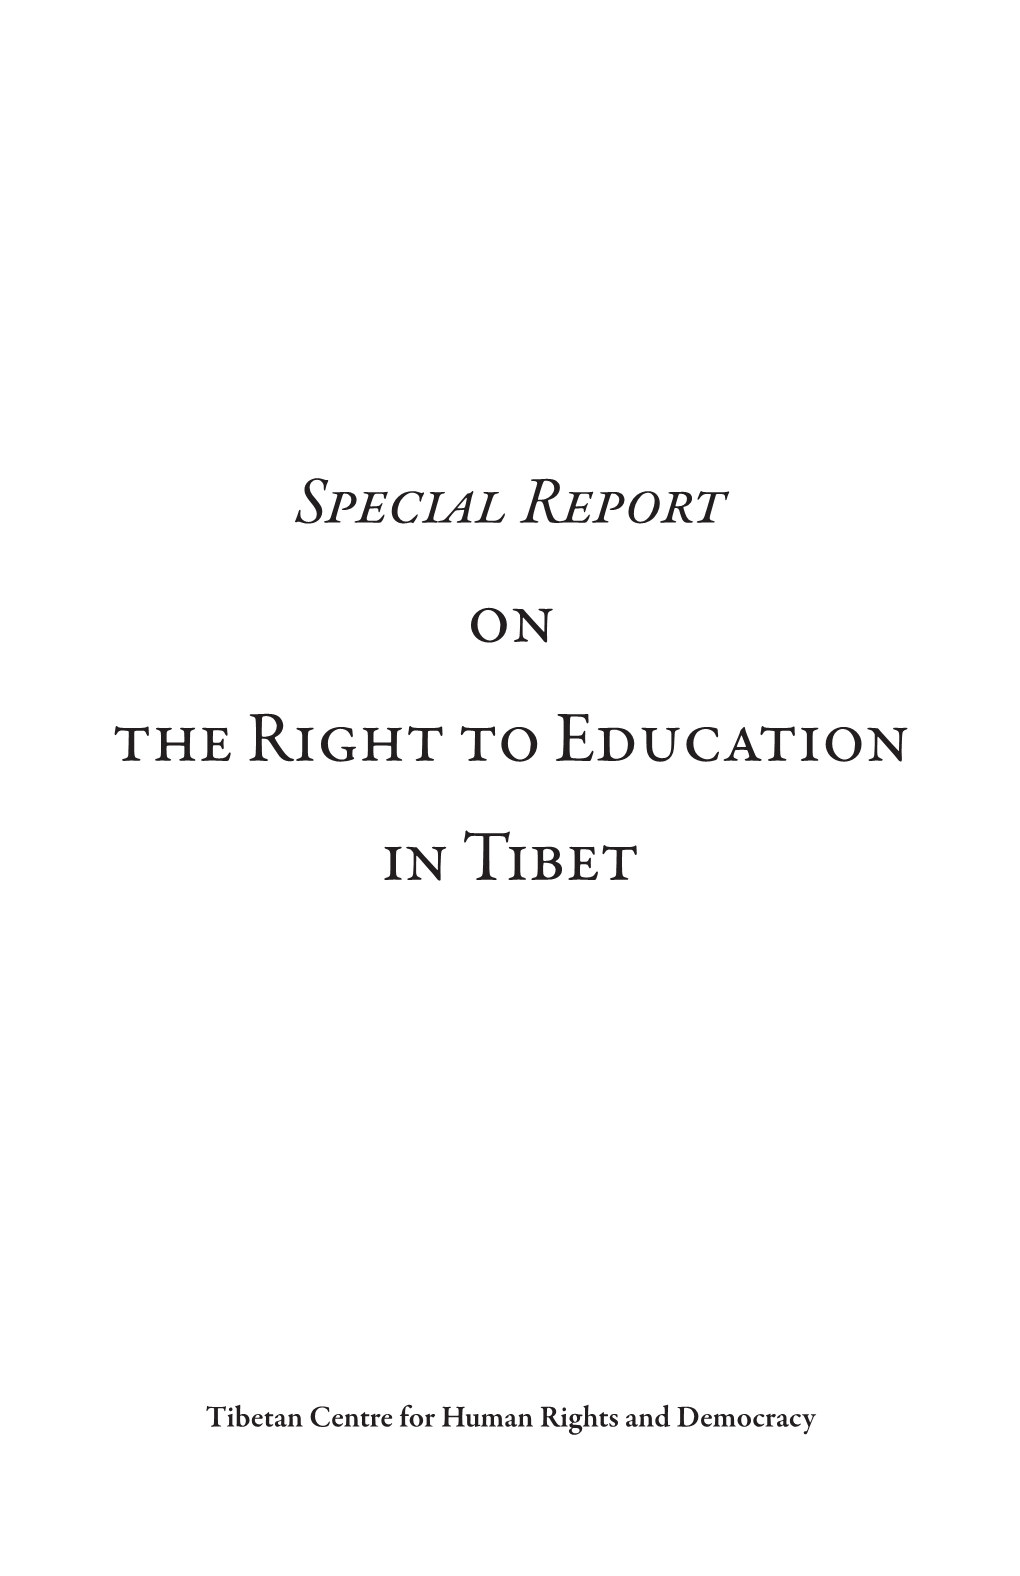 On the Right to Education in Tibet